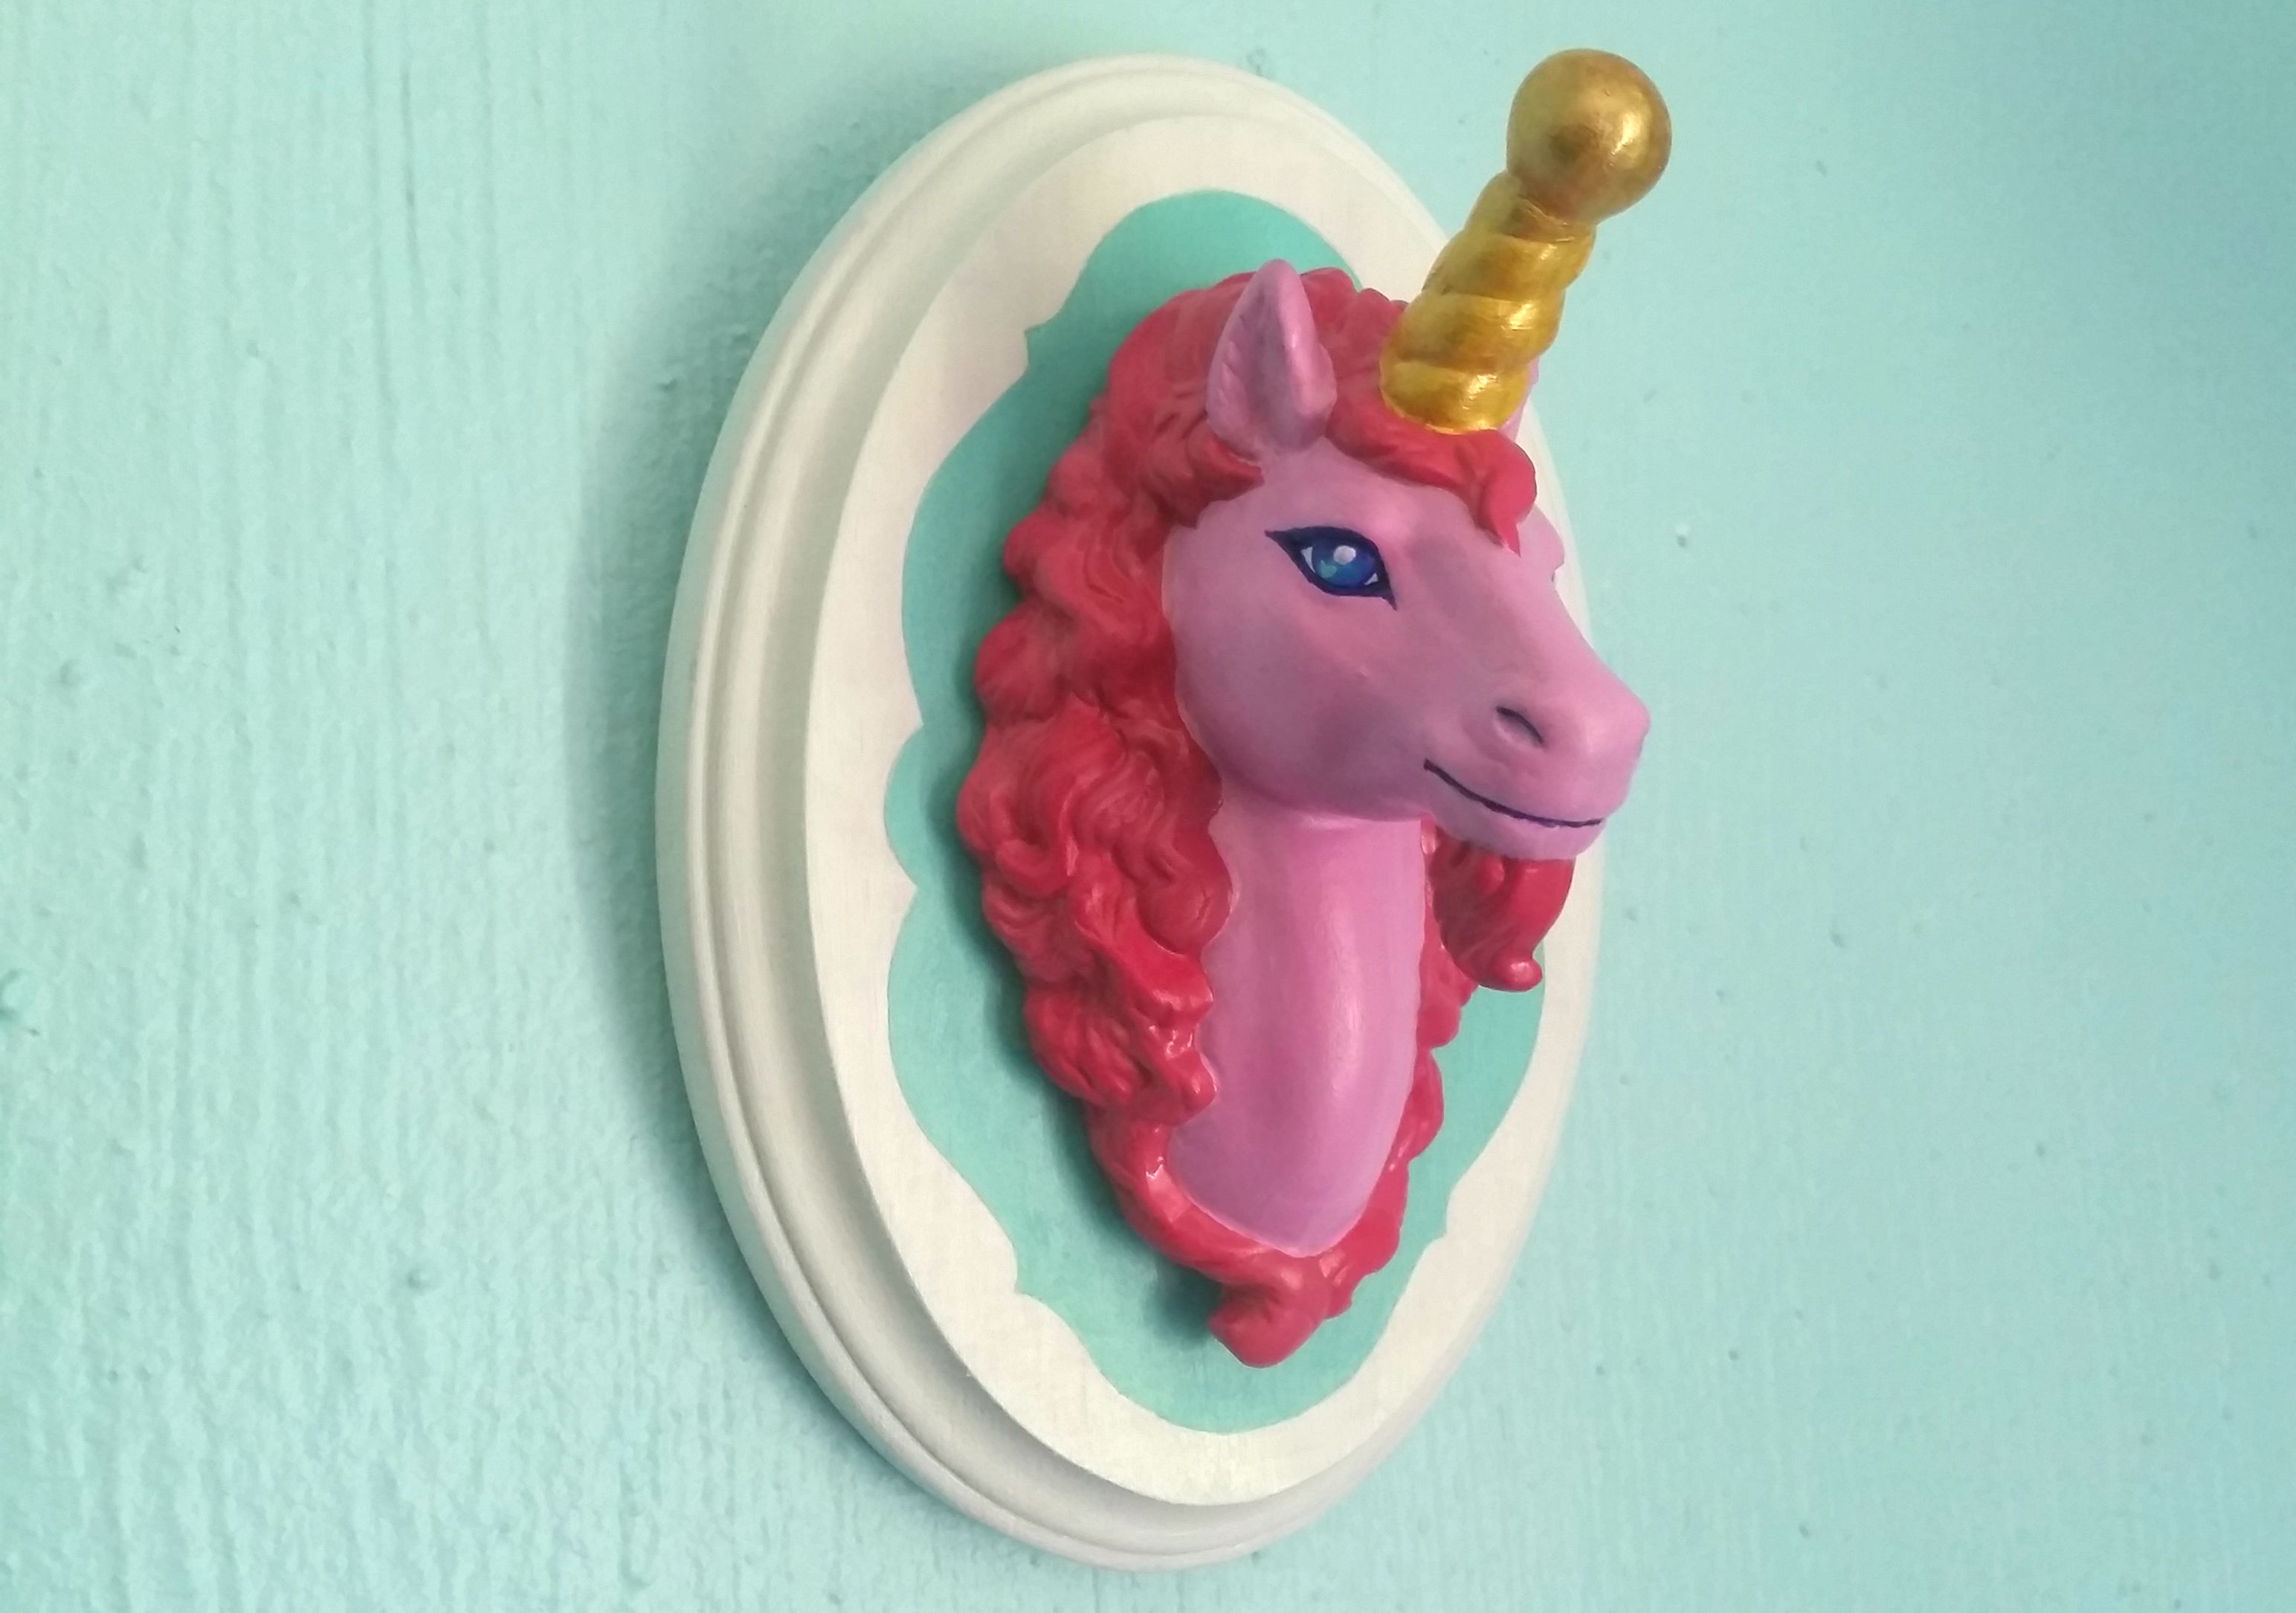 Pink unicorn head mounted on a teal wall.